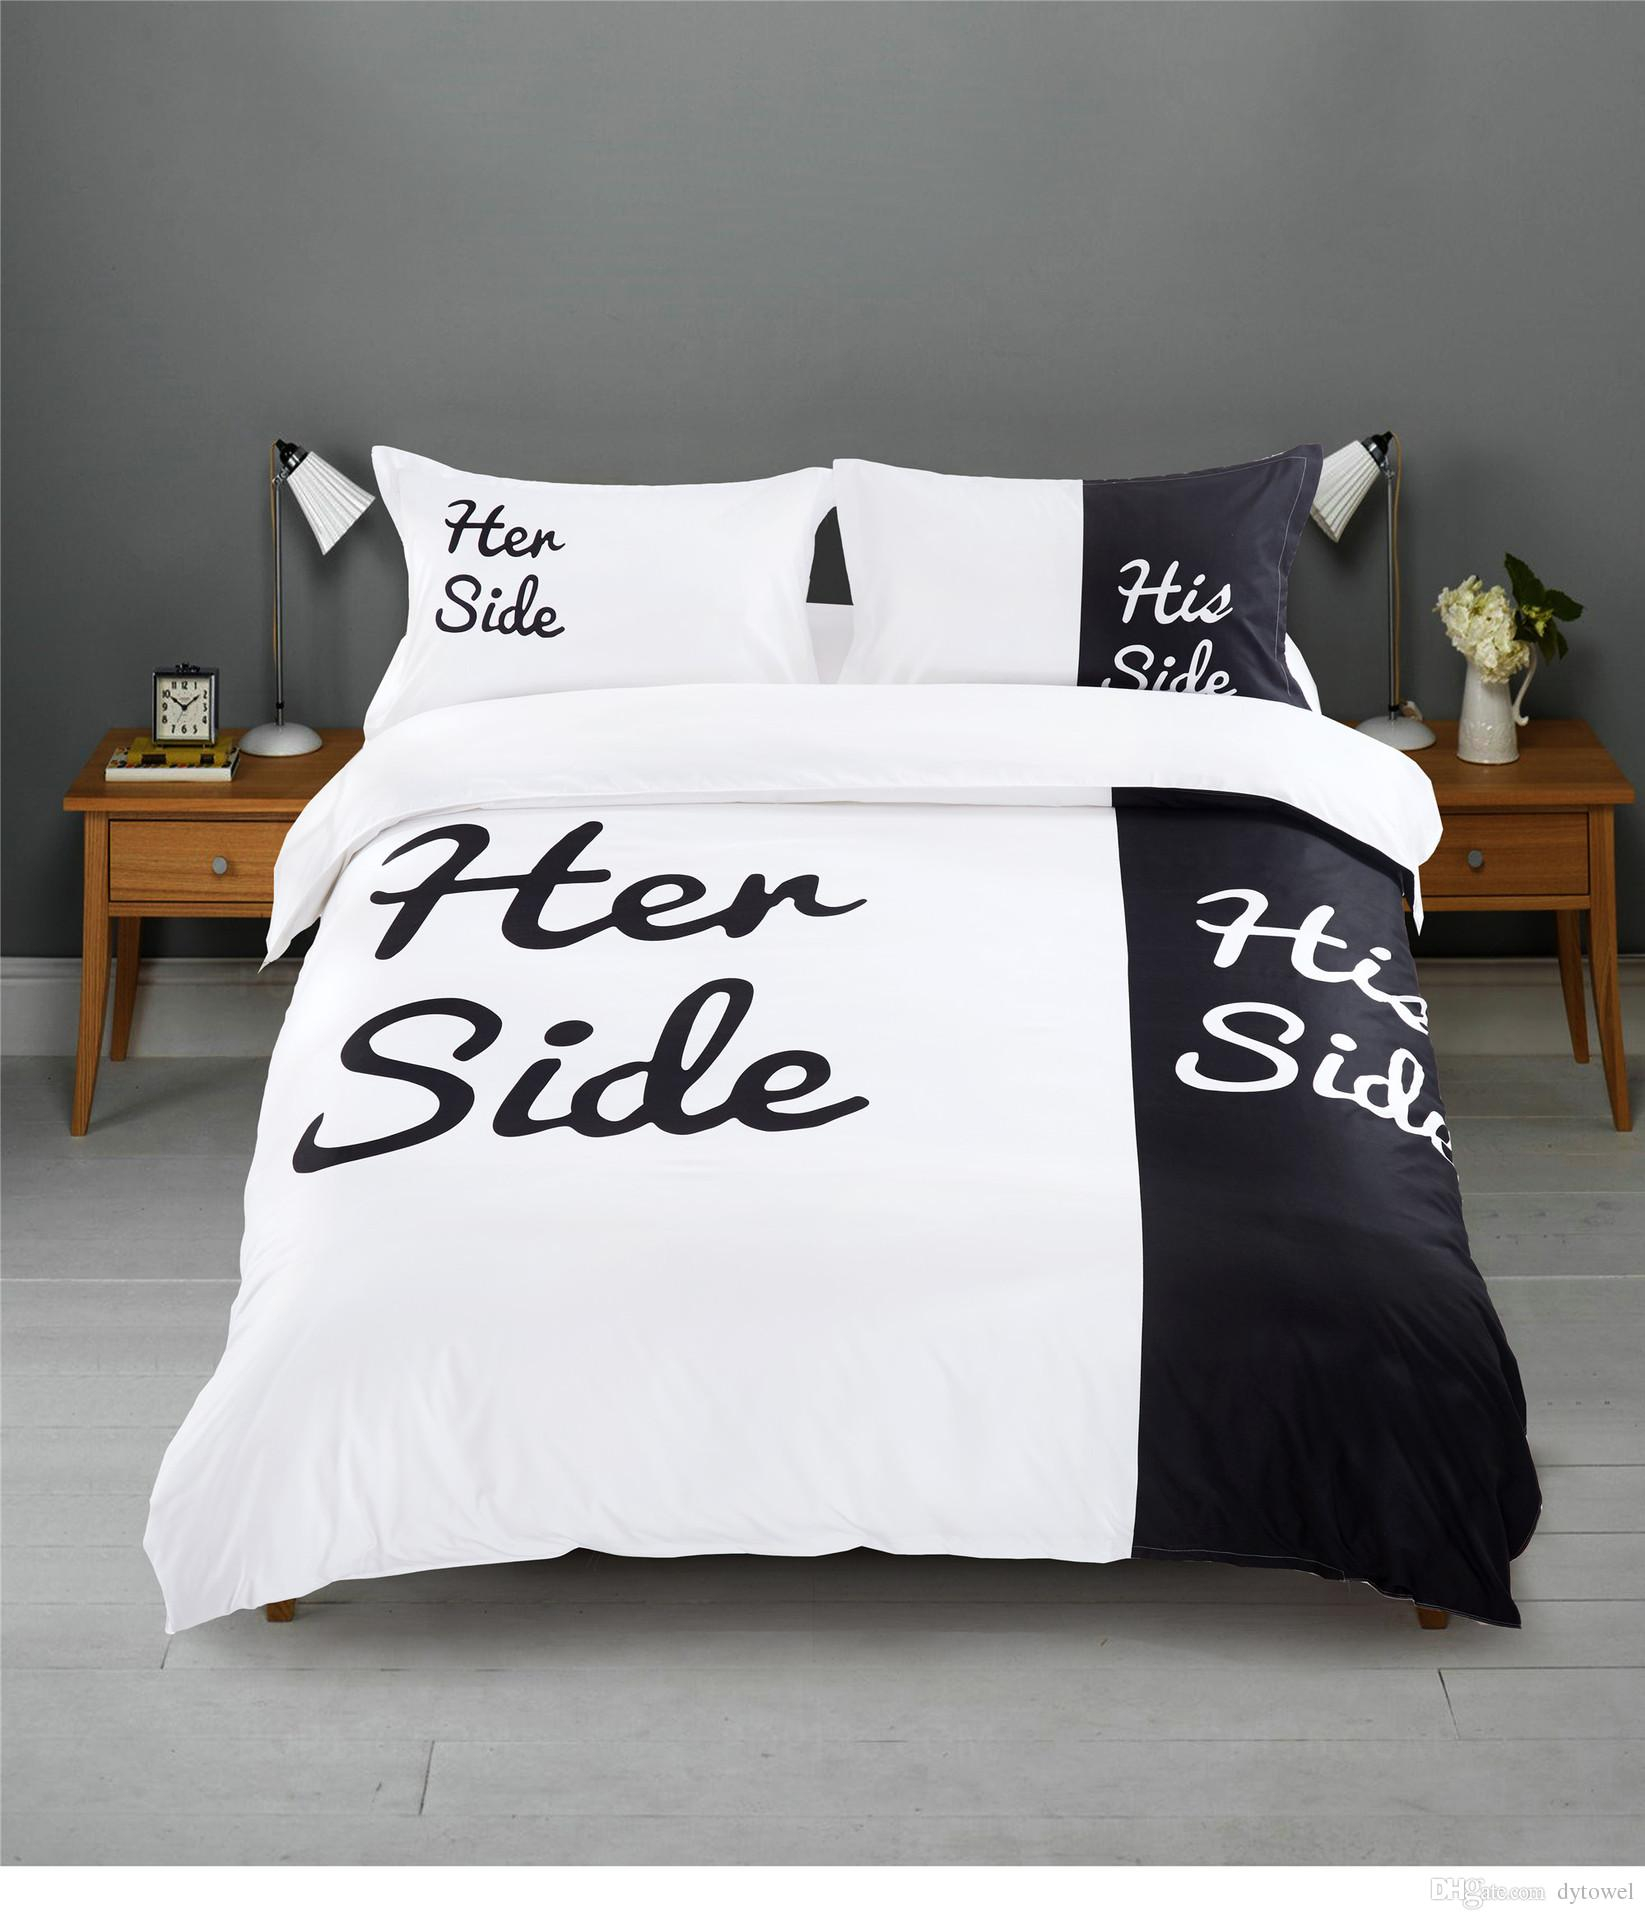 Her Side His Side Couples Bedding Sets 4pcs 3pcs Duvet Cover Bed Sheet With Pillow Casesqueen King White And Black Bed Linens Set throughout dimensions 1645 X 1920